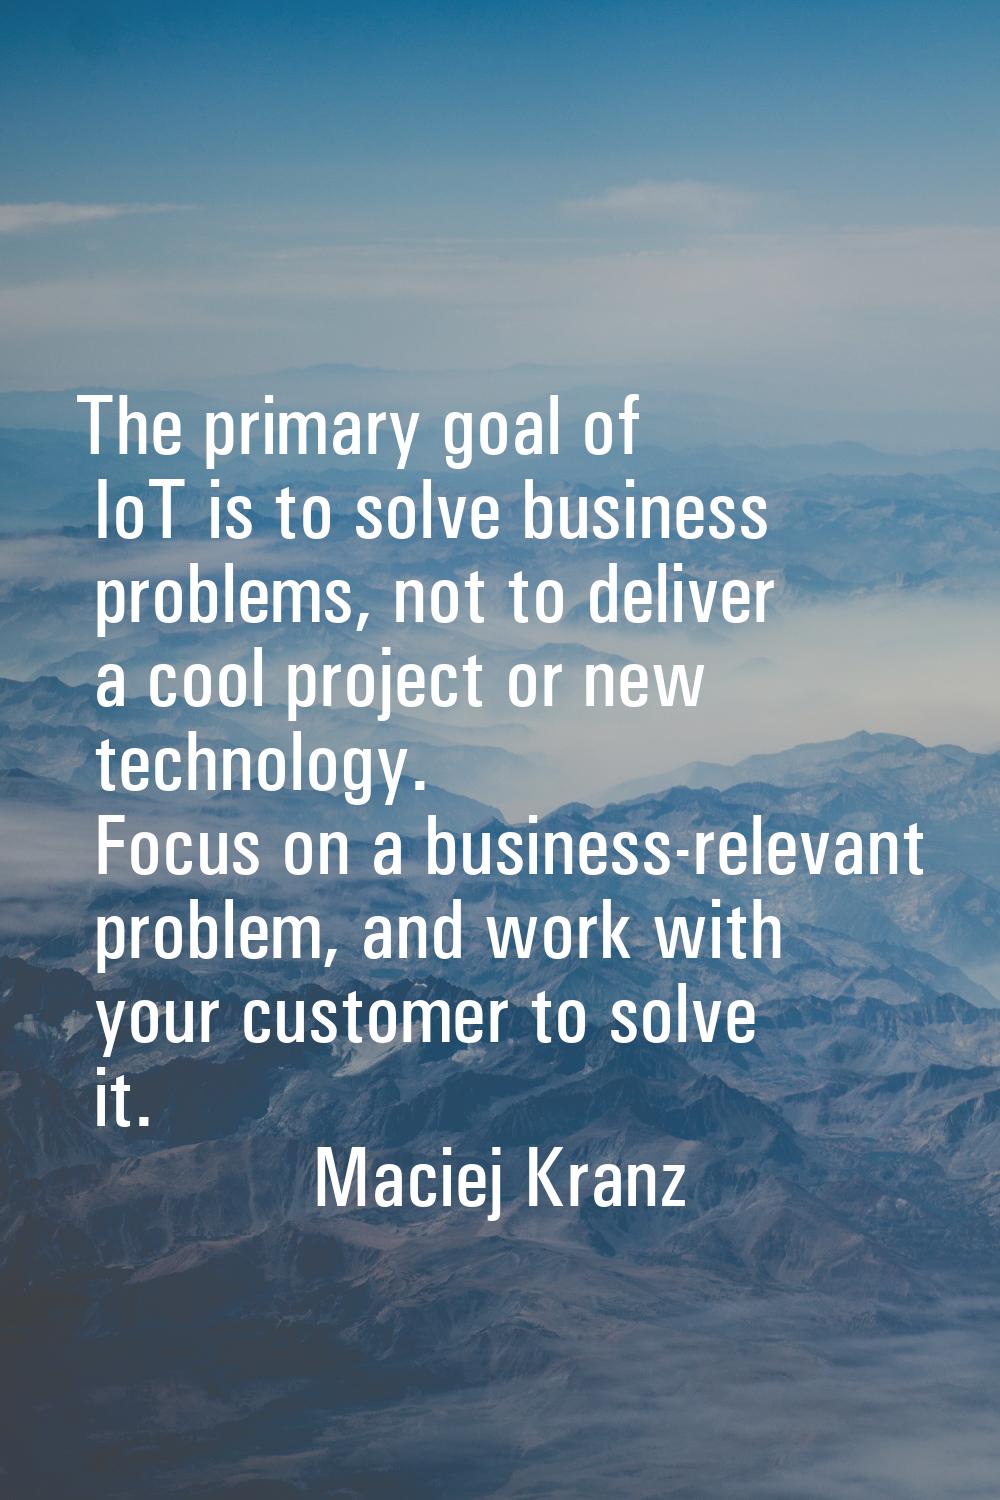 The primary goal of IoT is to solve business problems, not to deliver a cool project or new technol